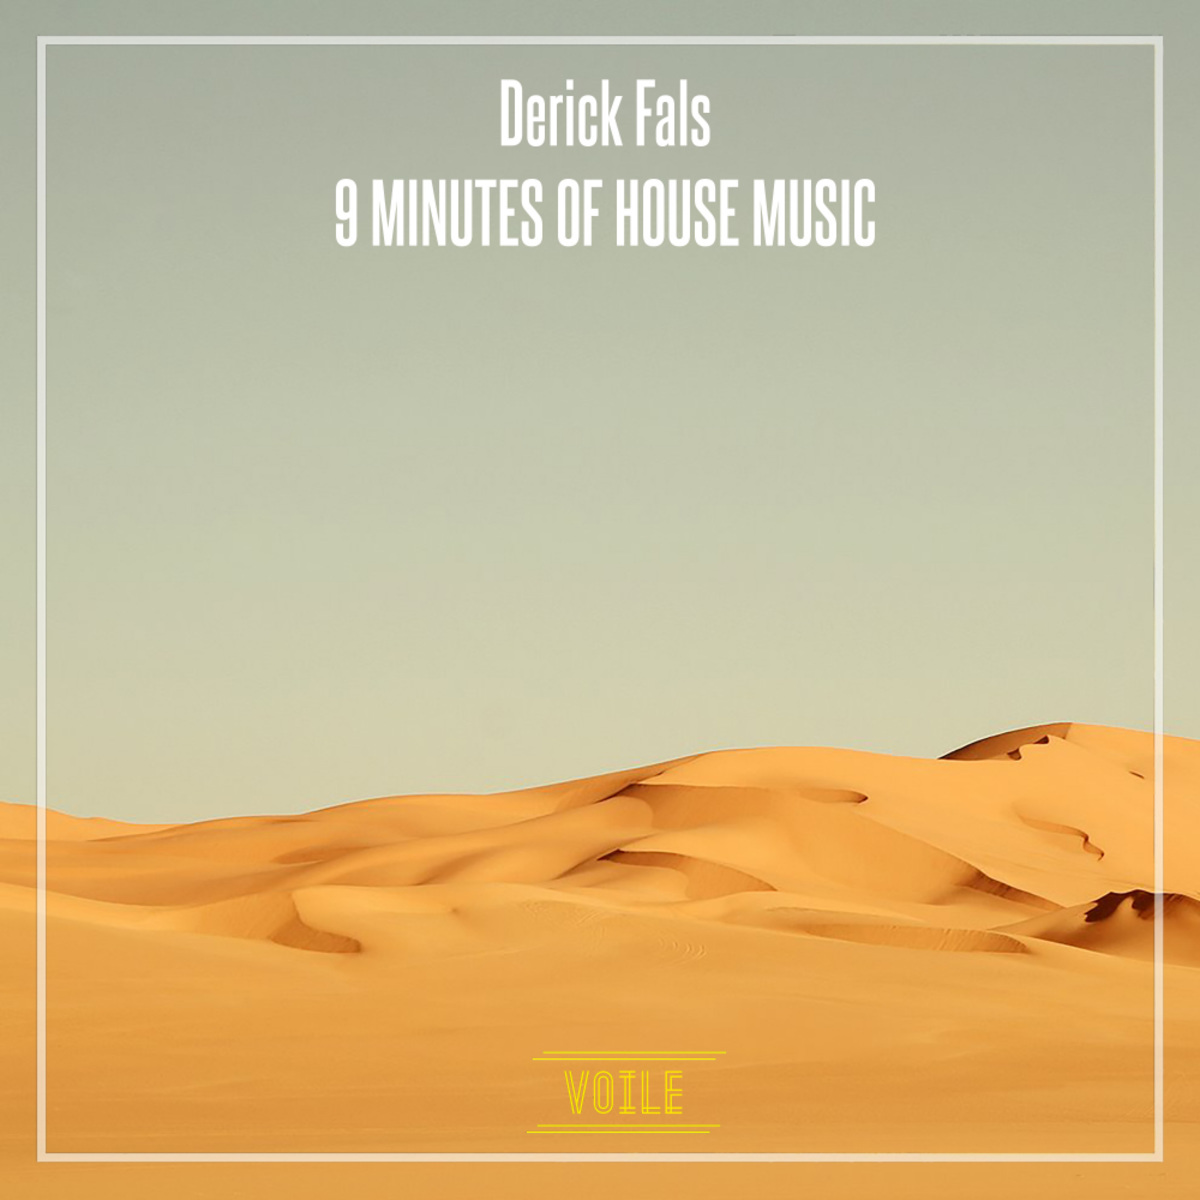 Derick Fals - 9 Minutes of House Music / Voile